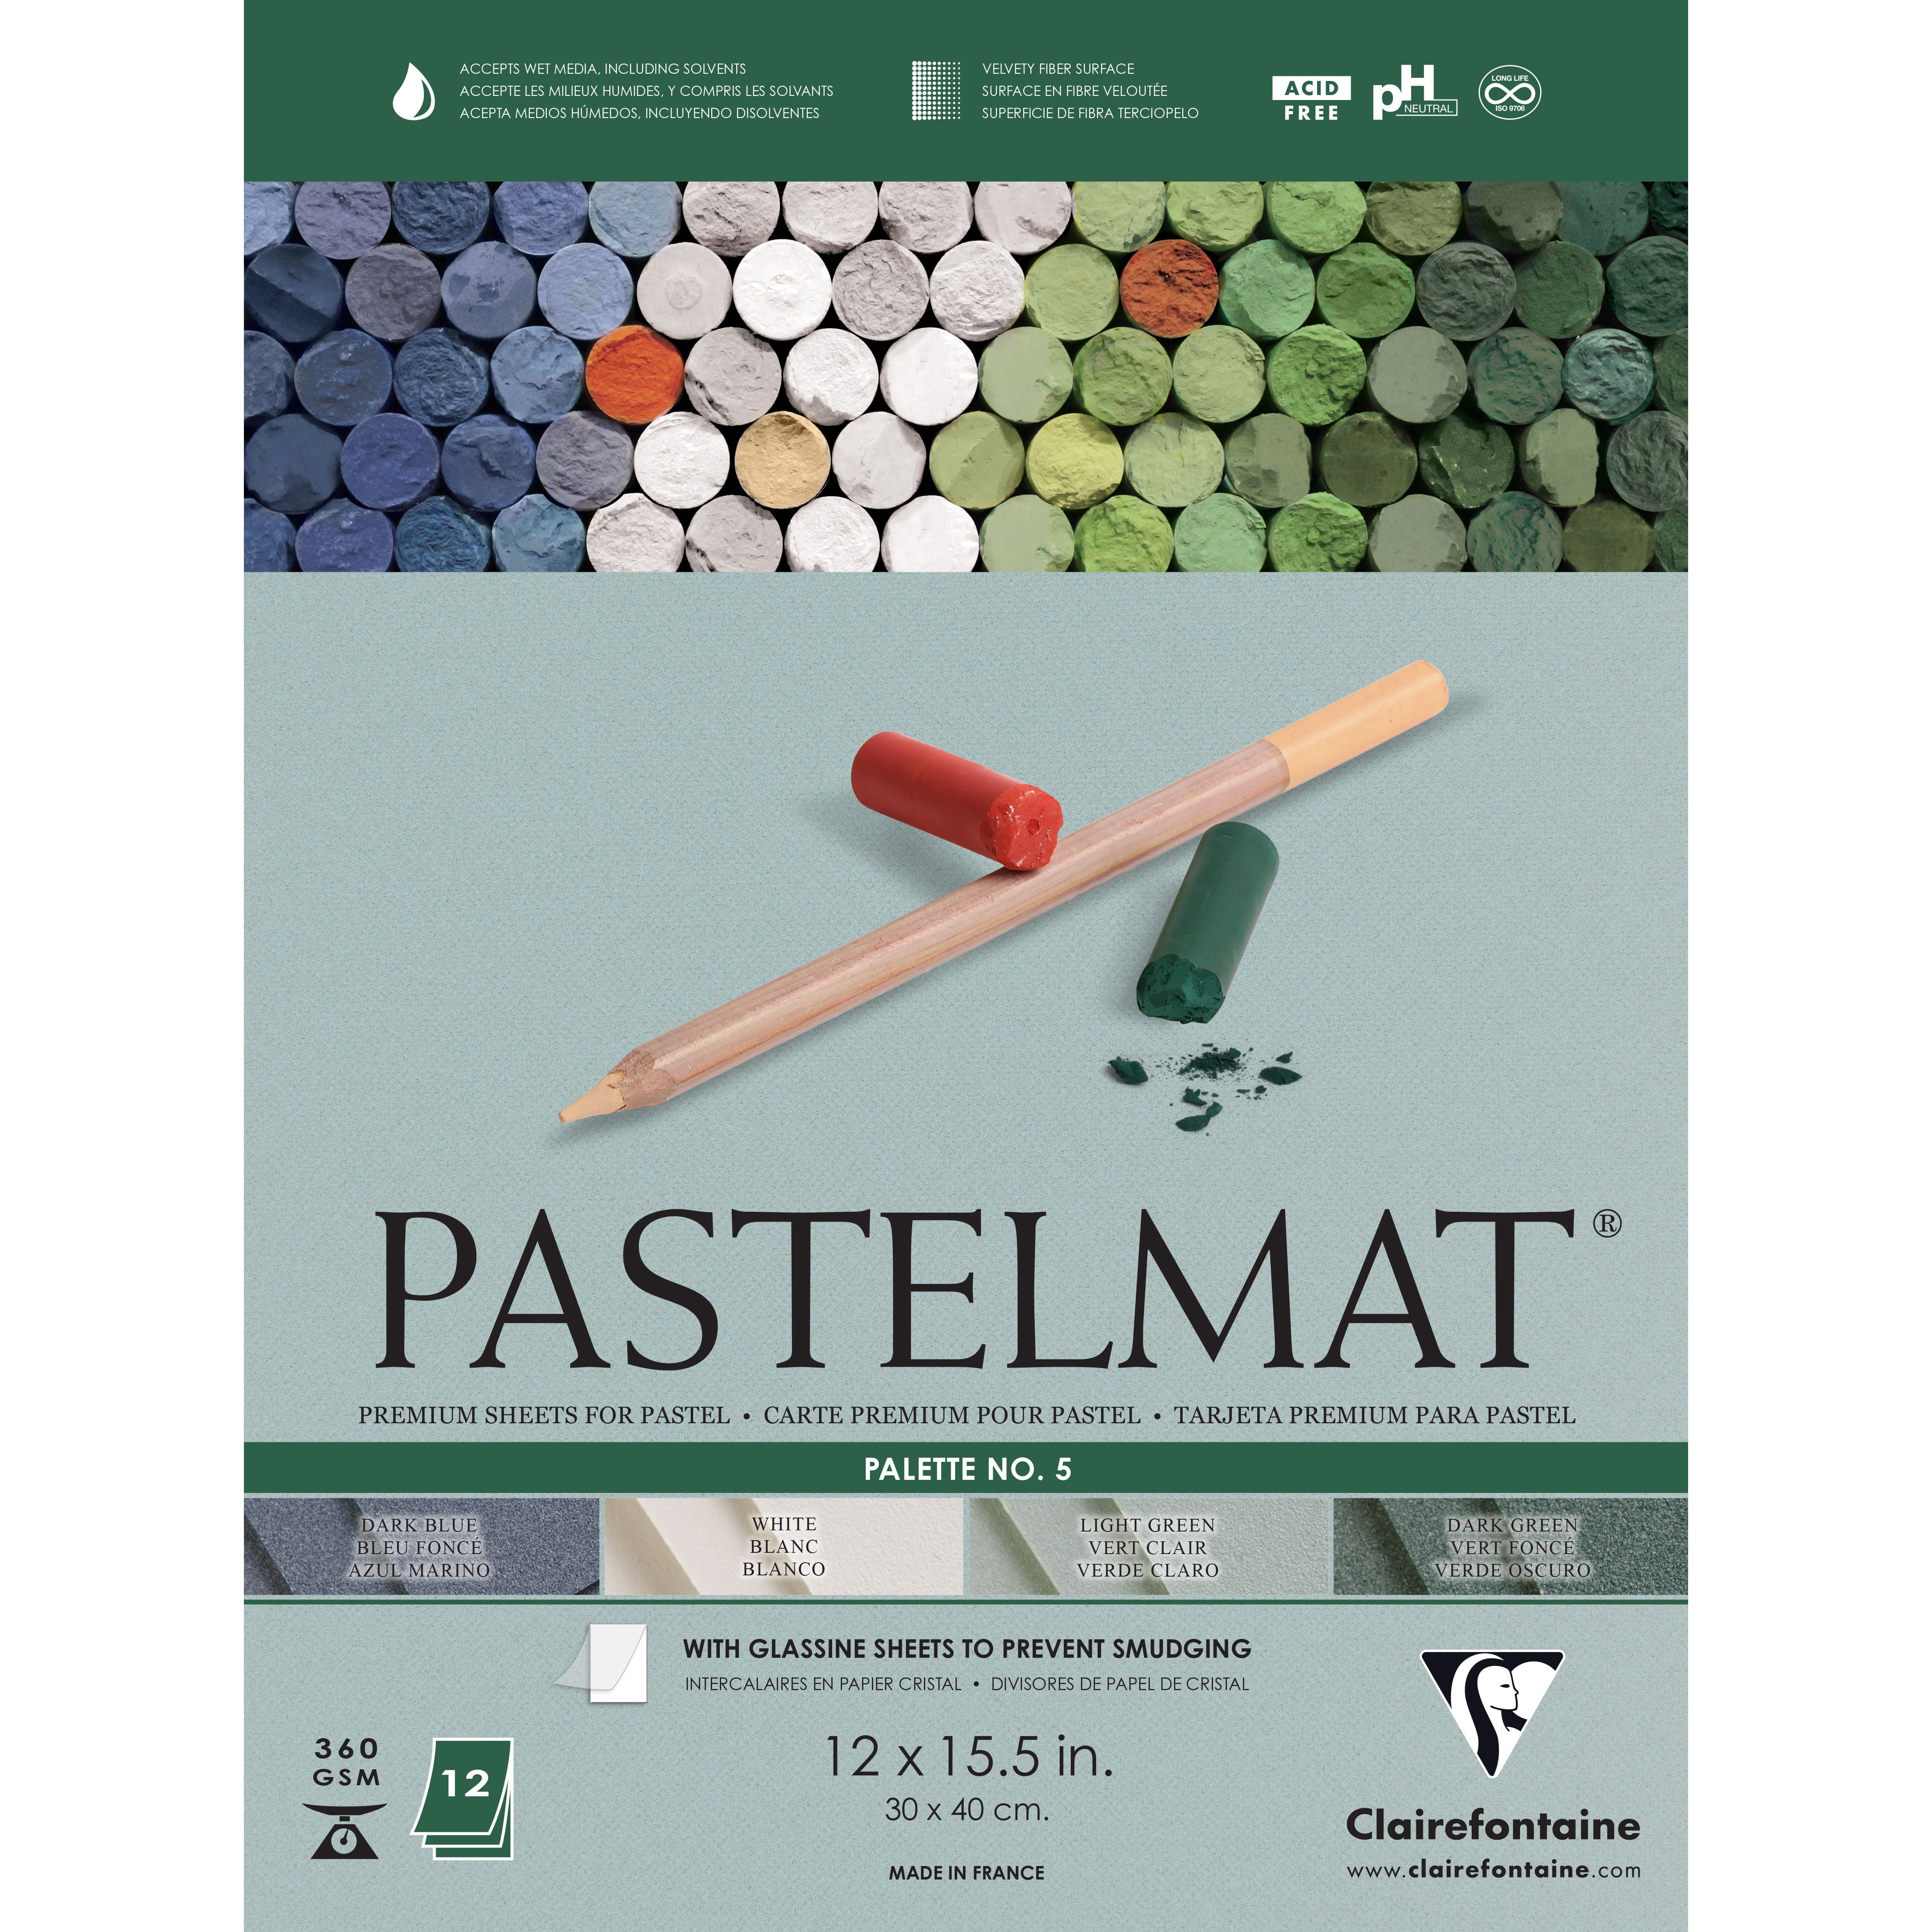 Clairefontaine Pastelmat Standard Sheets 19.5 x 27.5 in (50x70cm)